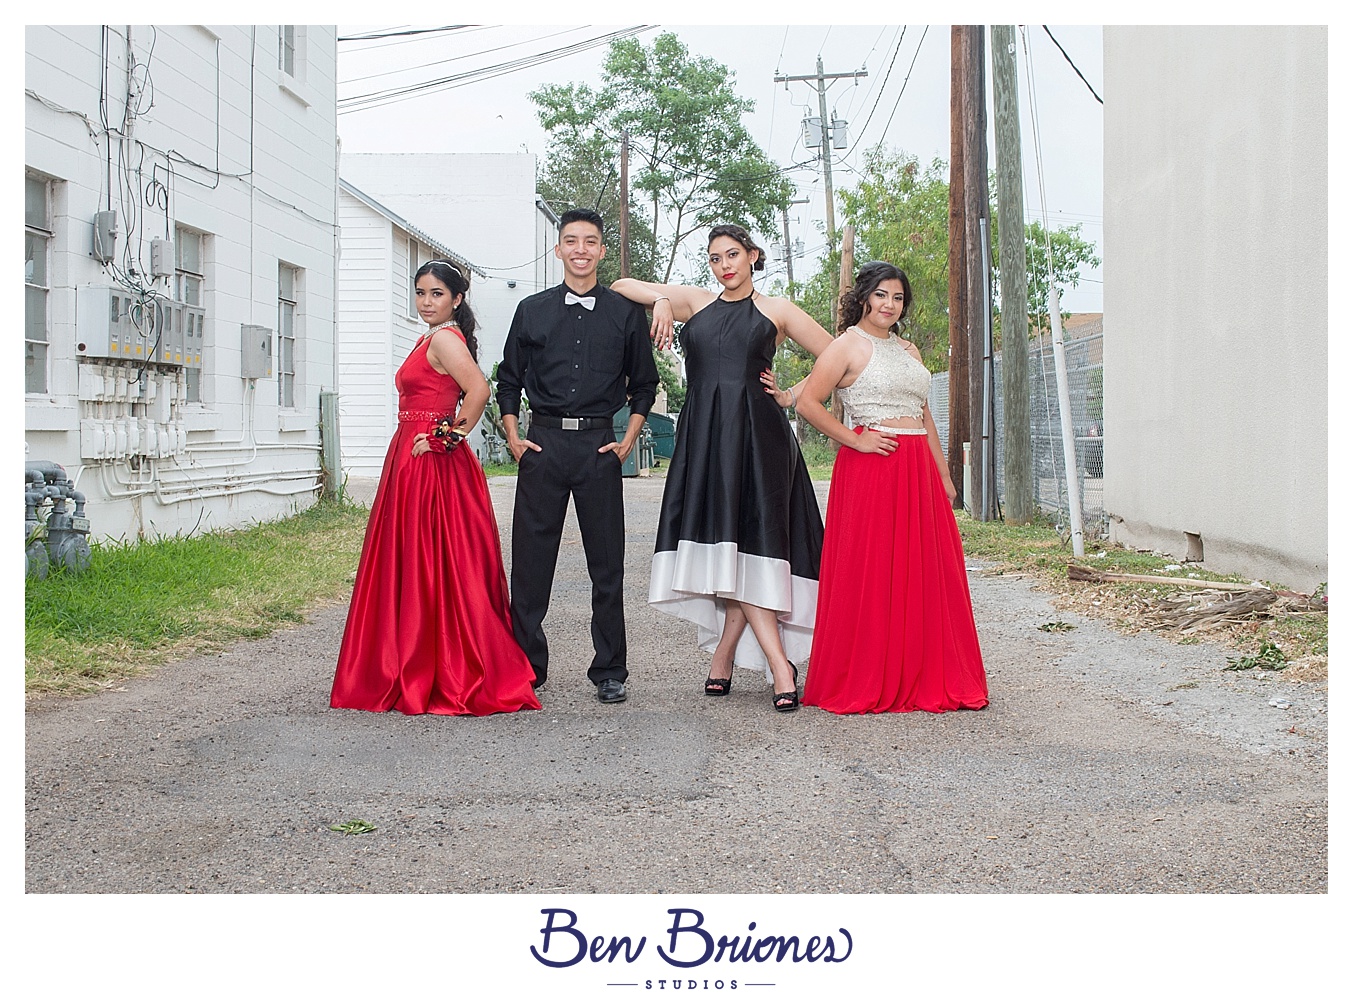 Corina and Friends – Prom Photo Session – McAllen, Texas